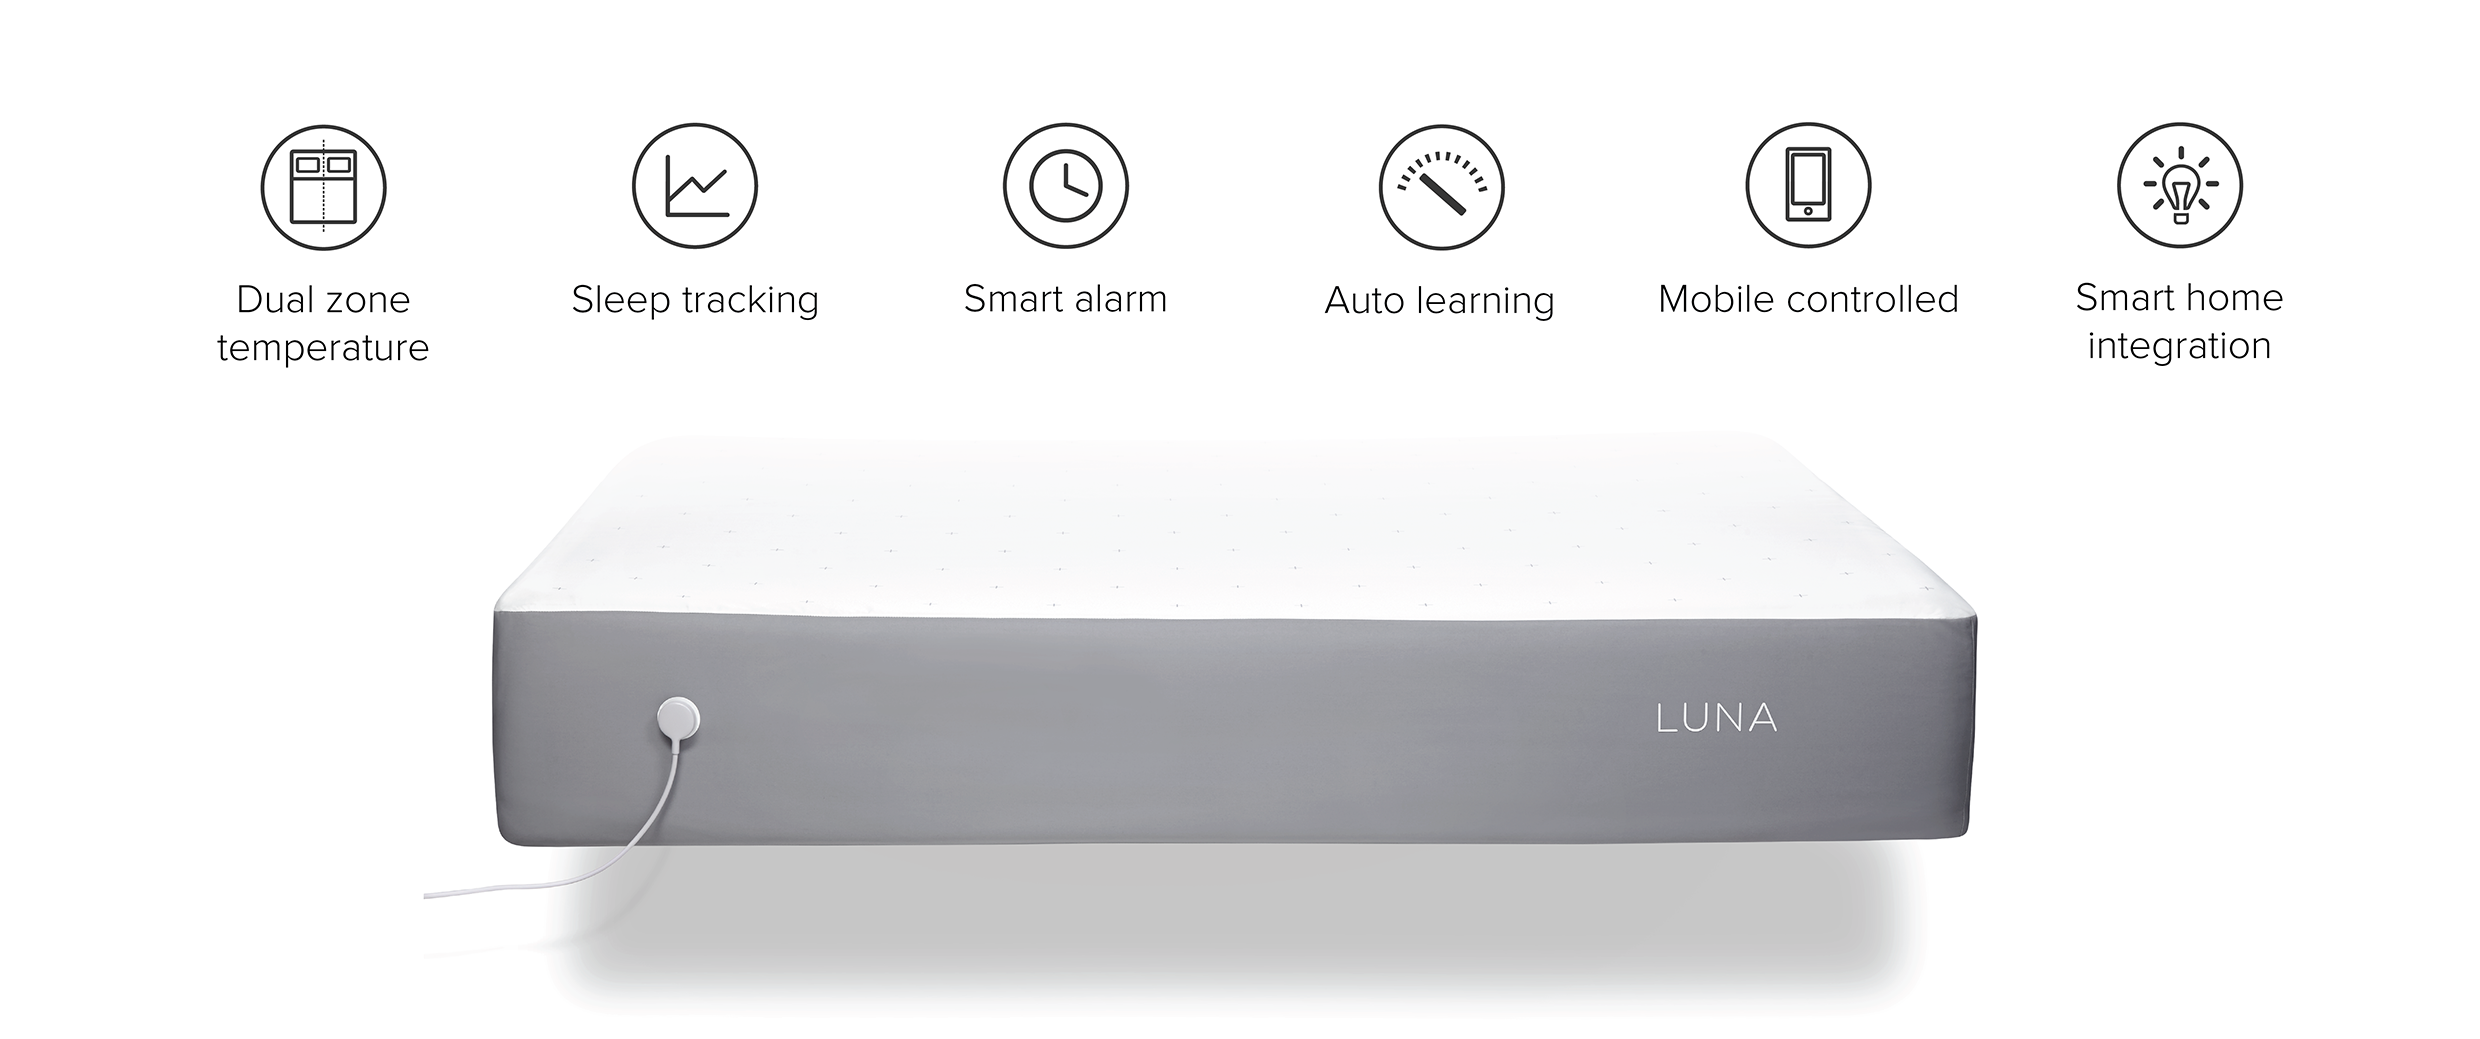 luna smart bed cover smart connected device gadget technology smartphone app data sleep monitor home bedroom